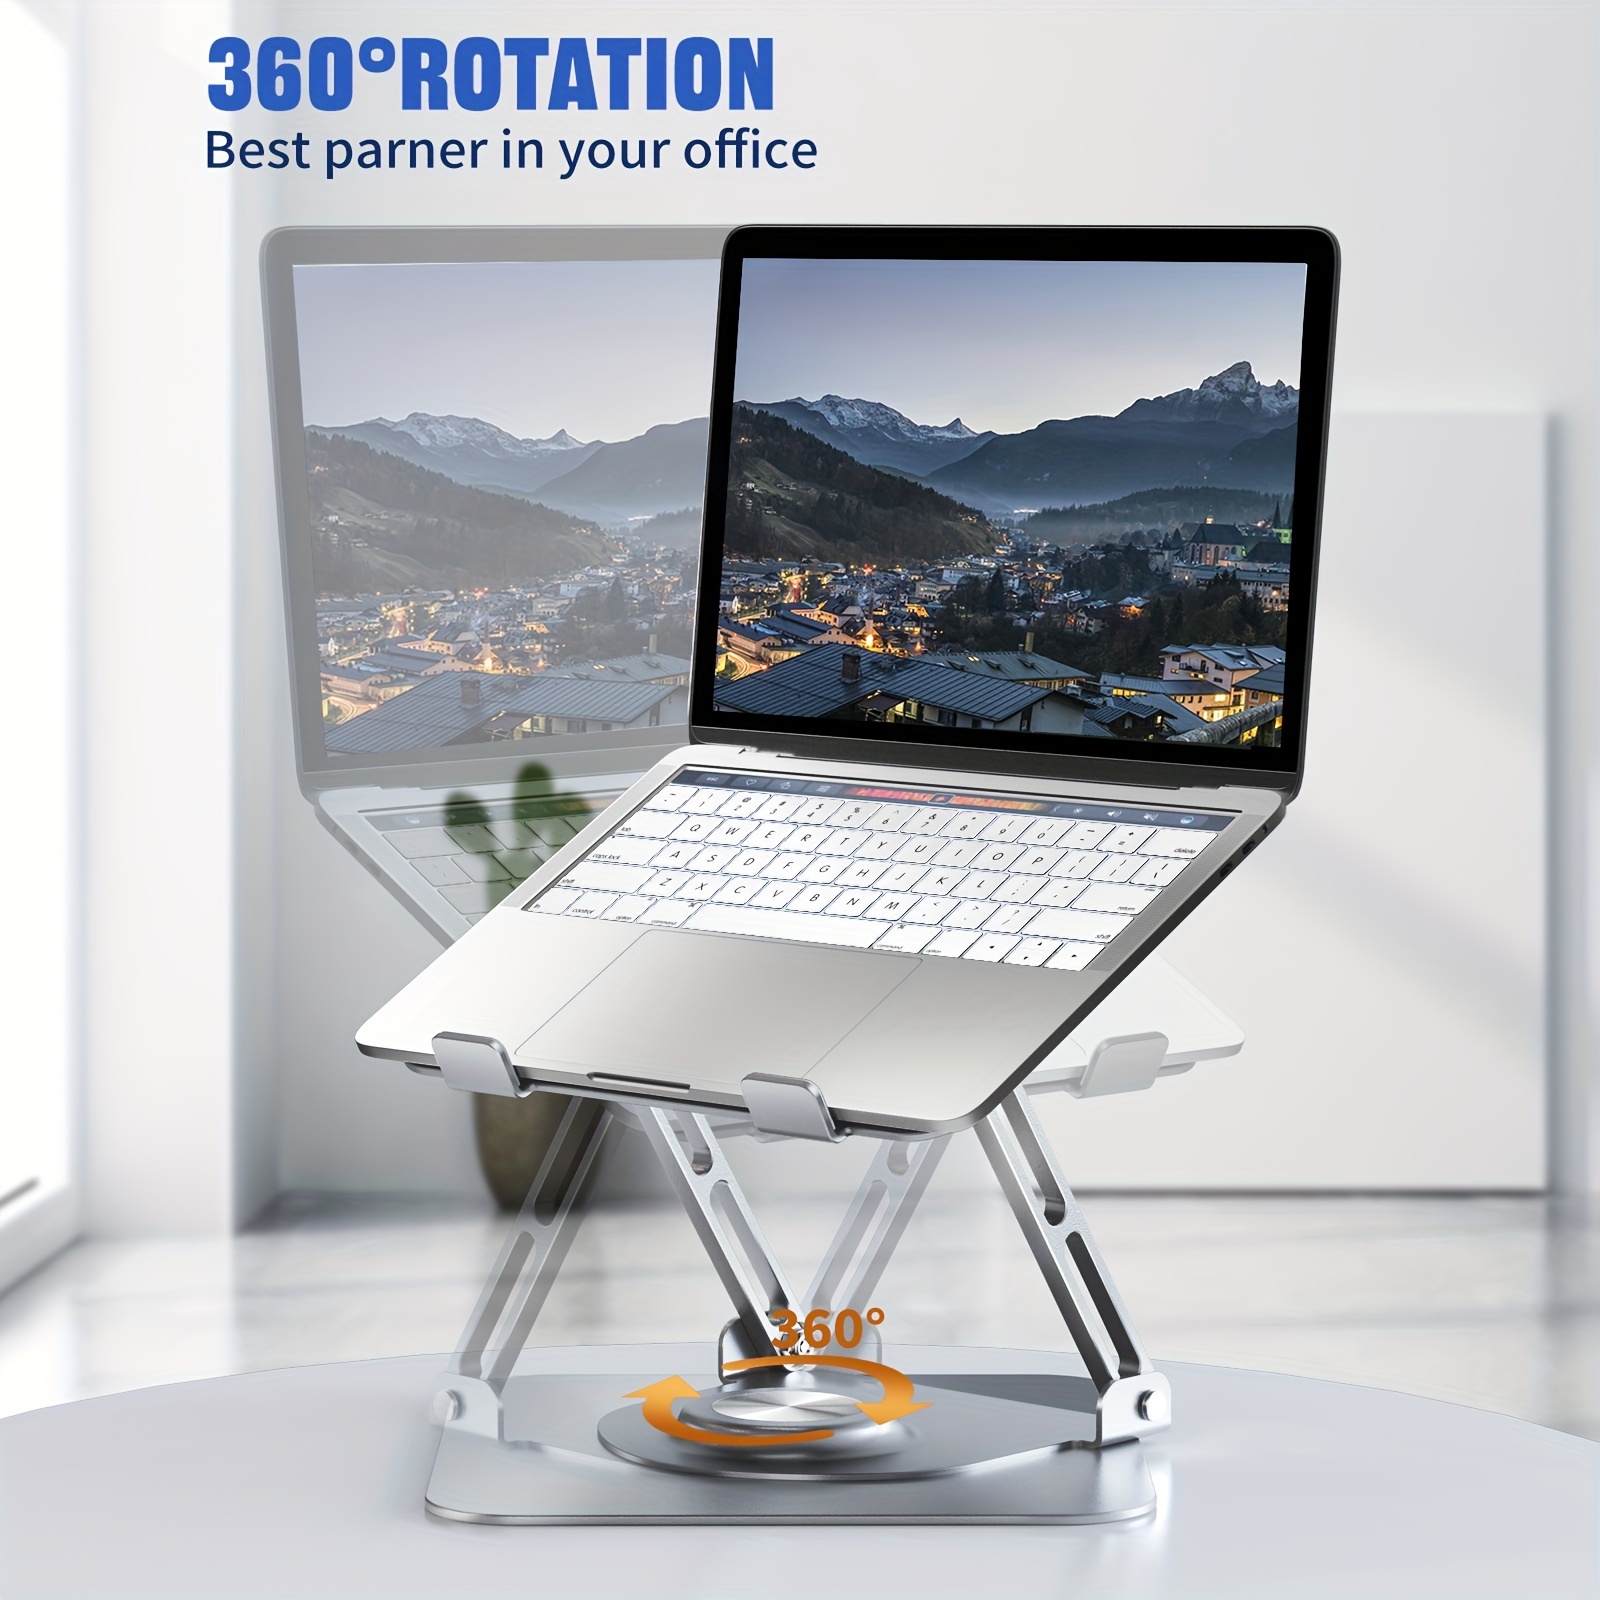 

Laptop Stand For Desk, Adjustable Computer Stand With 360° Rotating Base, Ergonomic Laptop Riser For Collaborative Work, Foldable & Portable Laptop Stand, Fits Macbook/all Laptops Up To 16 Inches